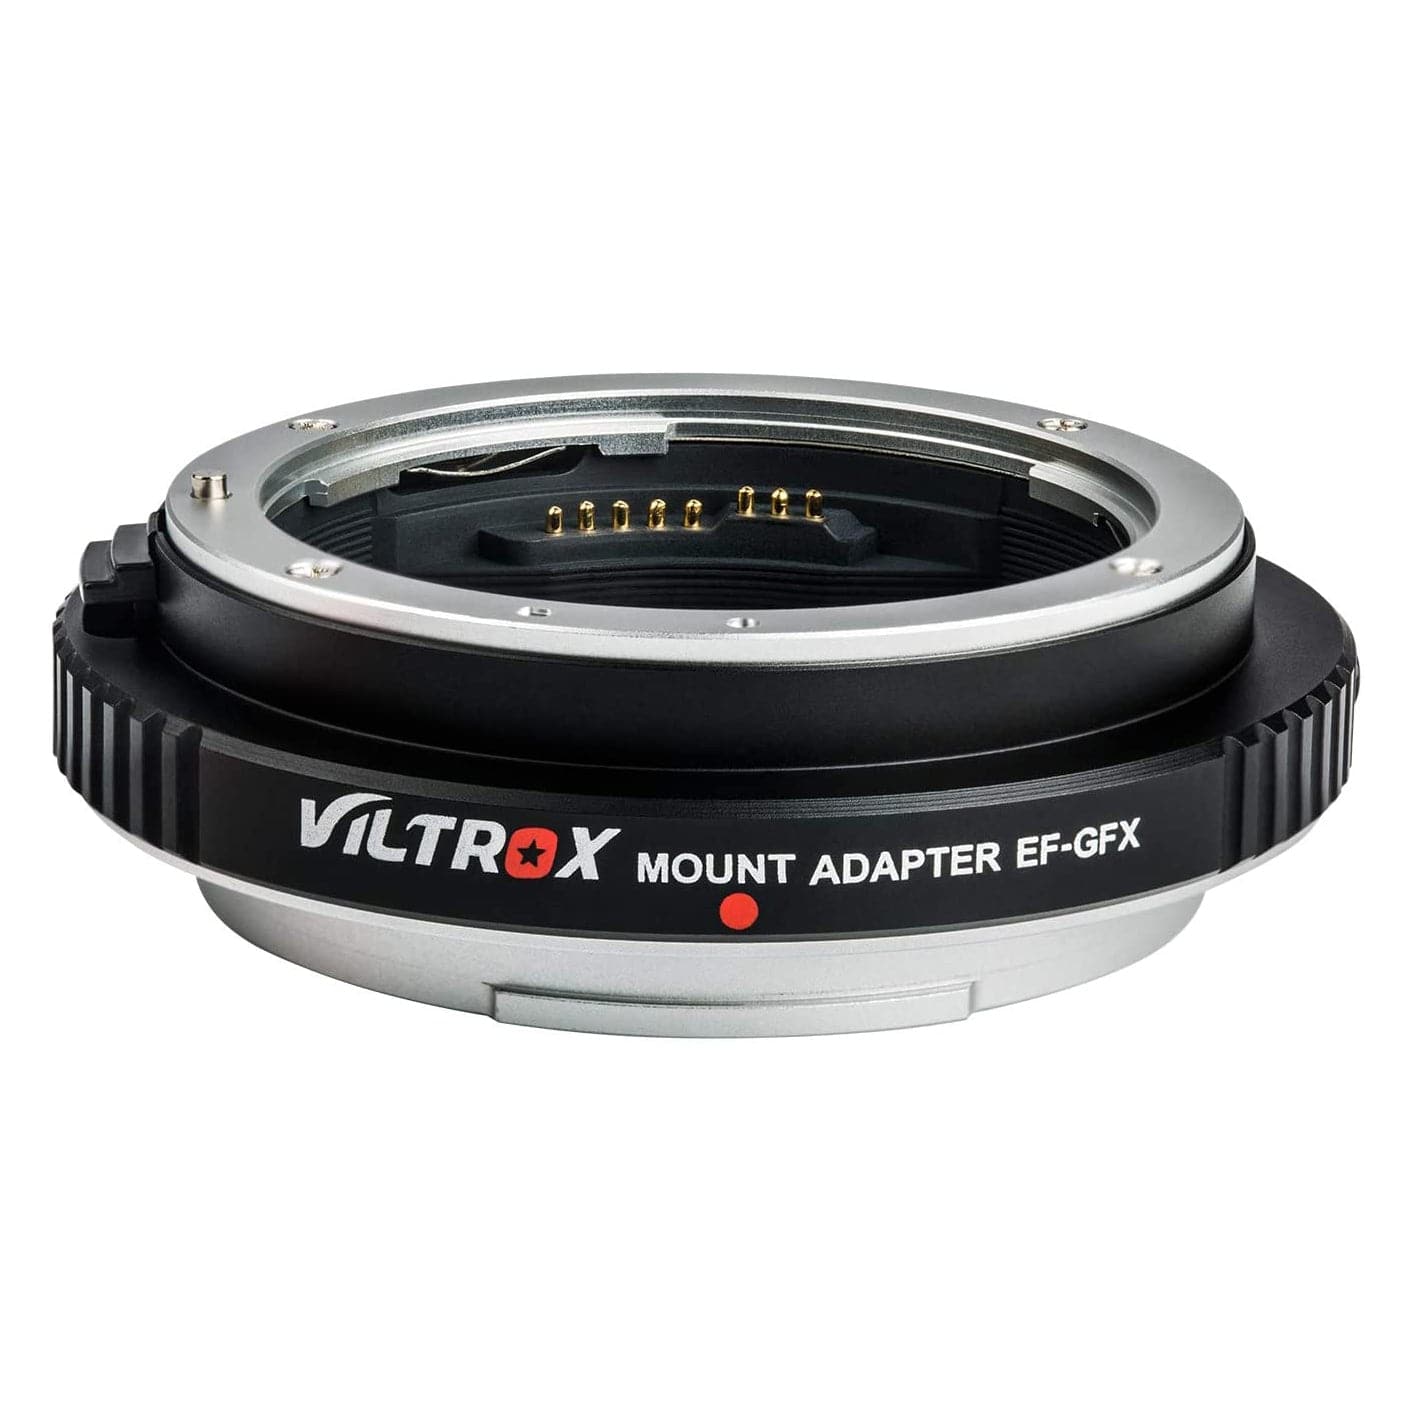 Viltrox EF-GFX/GFX Pro adapter is designed for Canon EF/EF-S series lens to  Fuji GFX-mount med-format cameras such as GFX 50S/GFX 50R